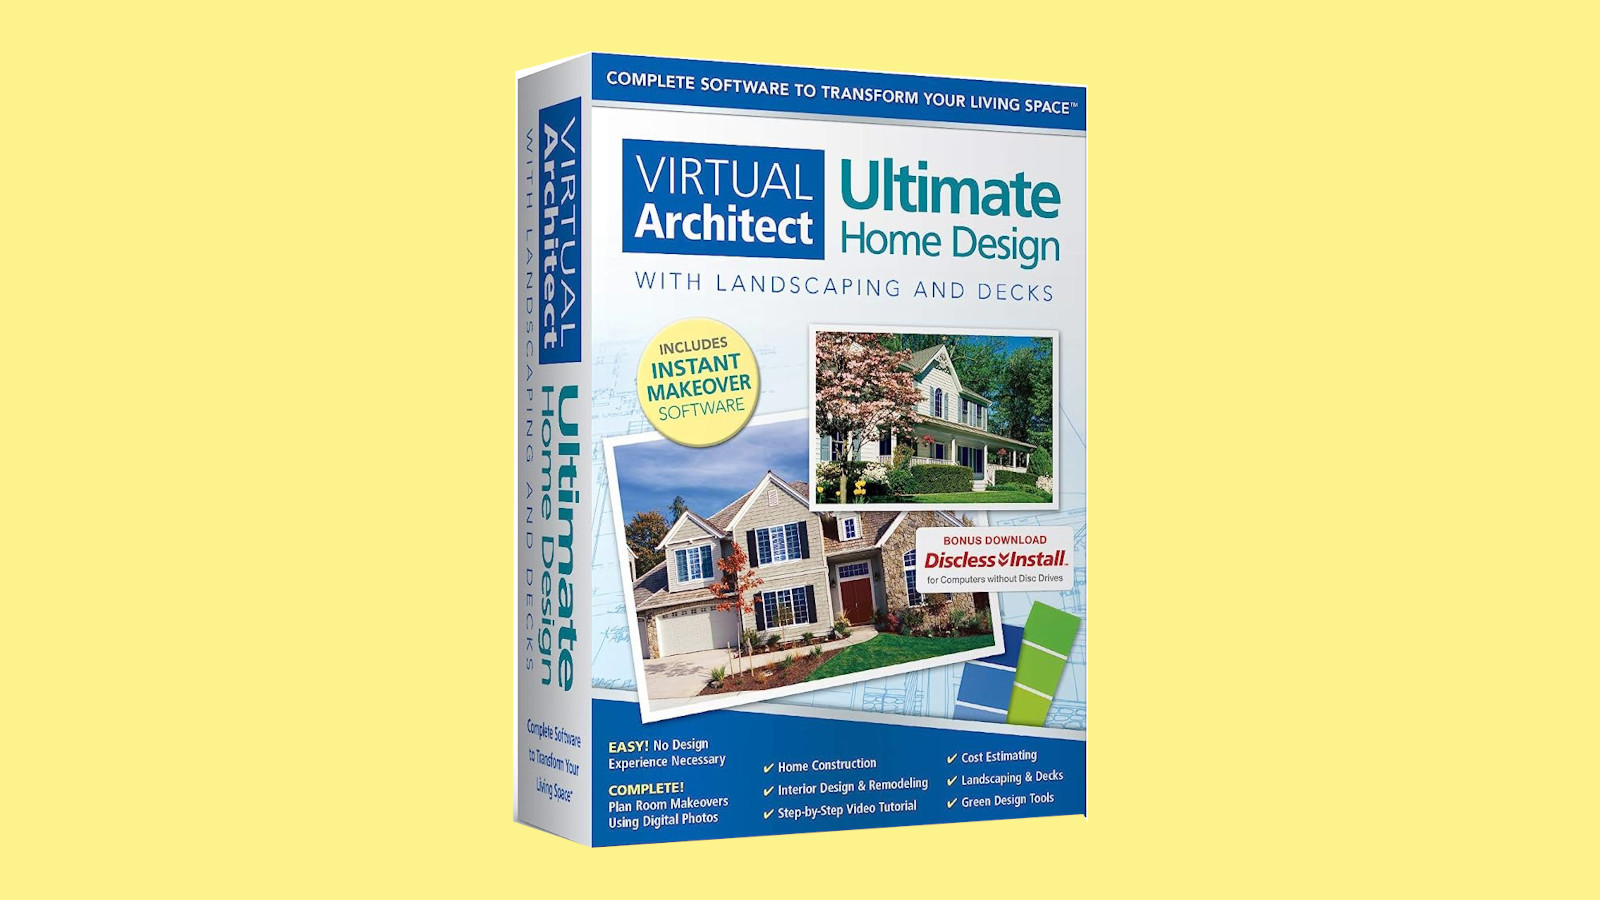 (77.68$) Virtual Architect Ultimate Home Design with Landscaping and Decks CD Key